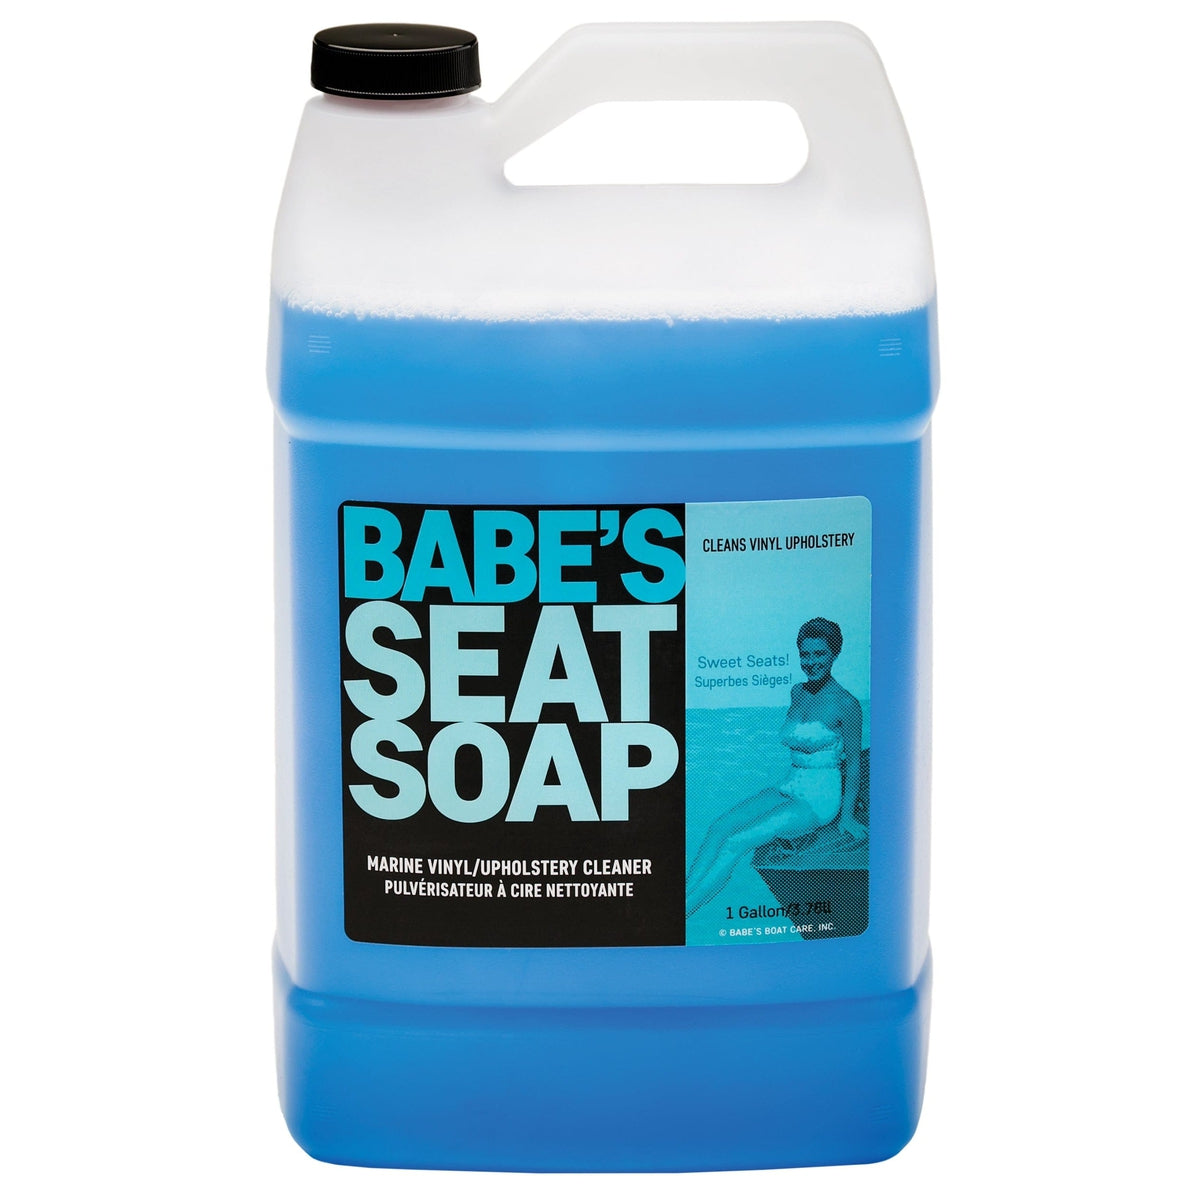 Babes Boat Care Products Not Qualified for Free Shipping Babe's Seat Soap 5-Gallon #BB8005